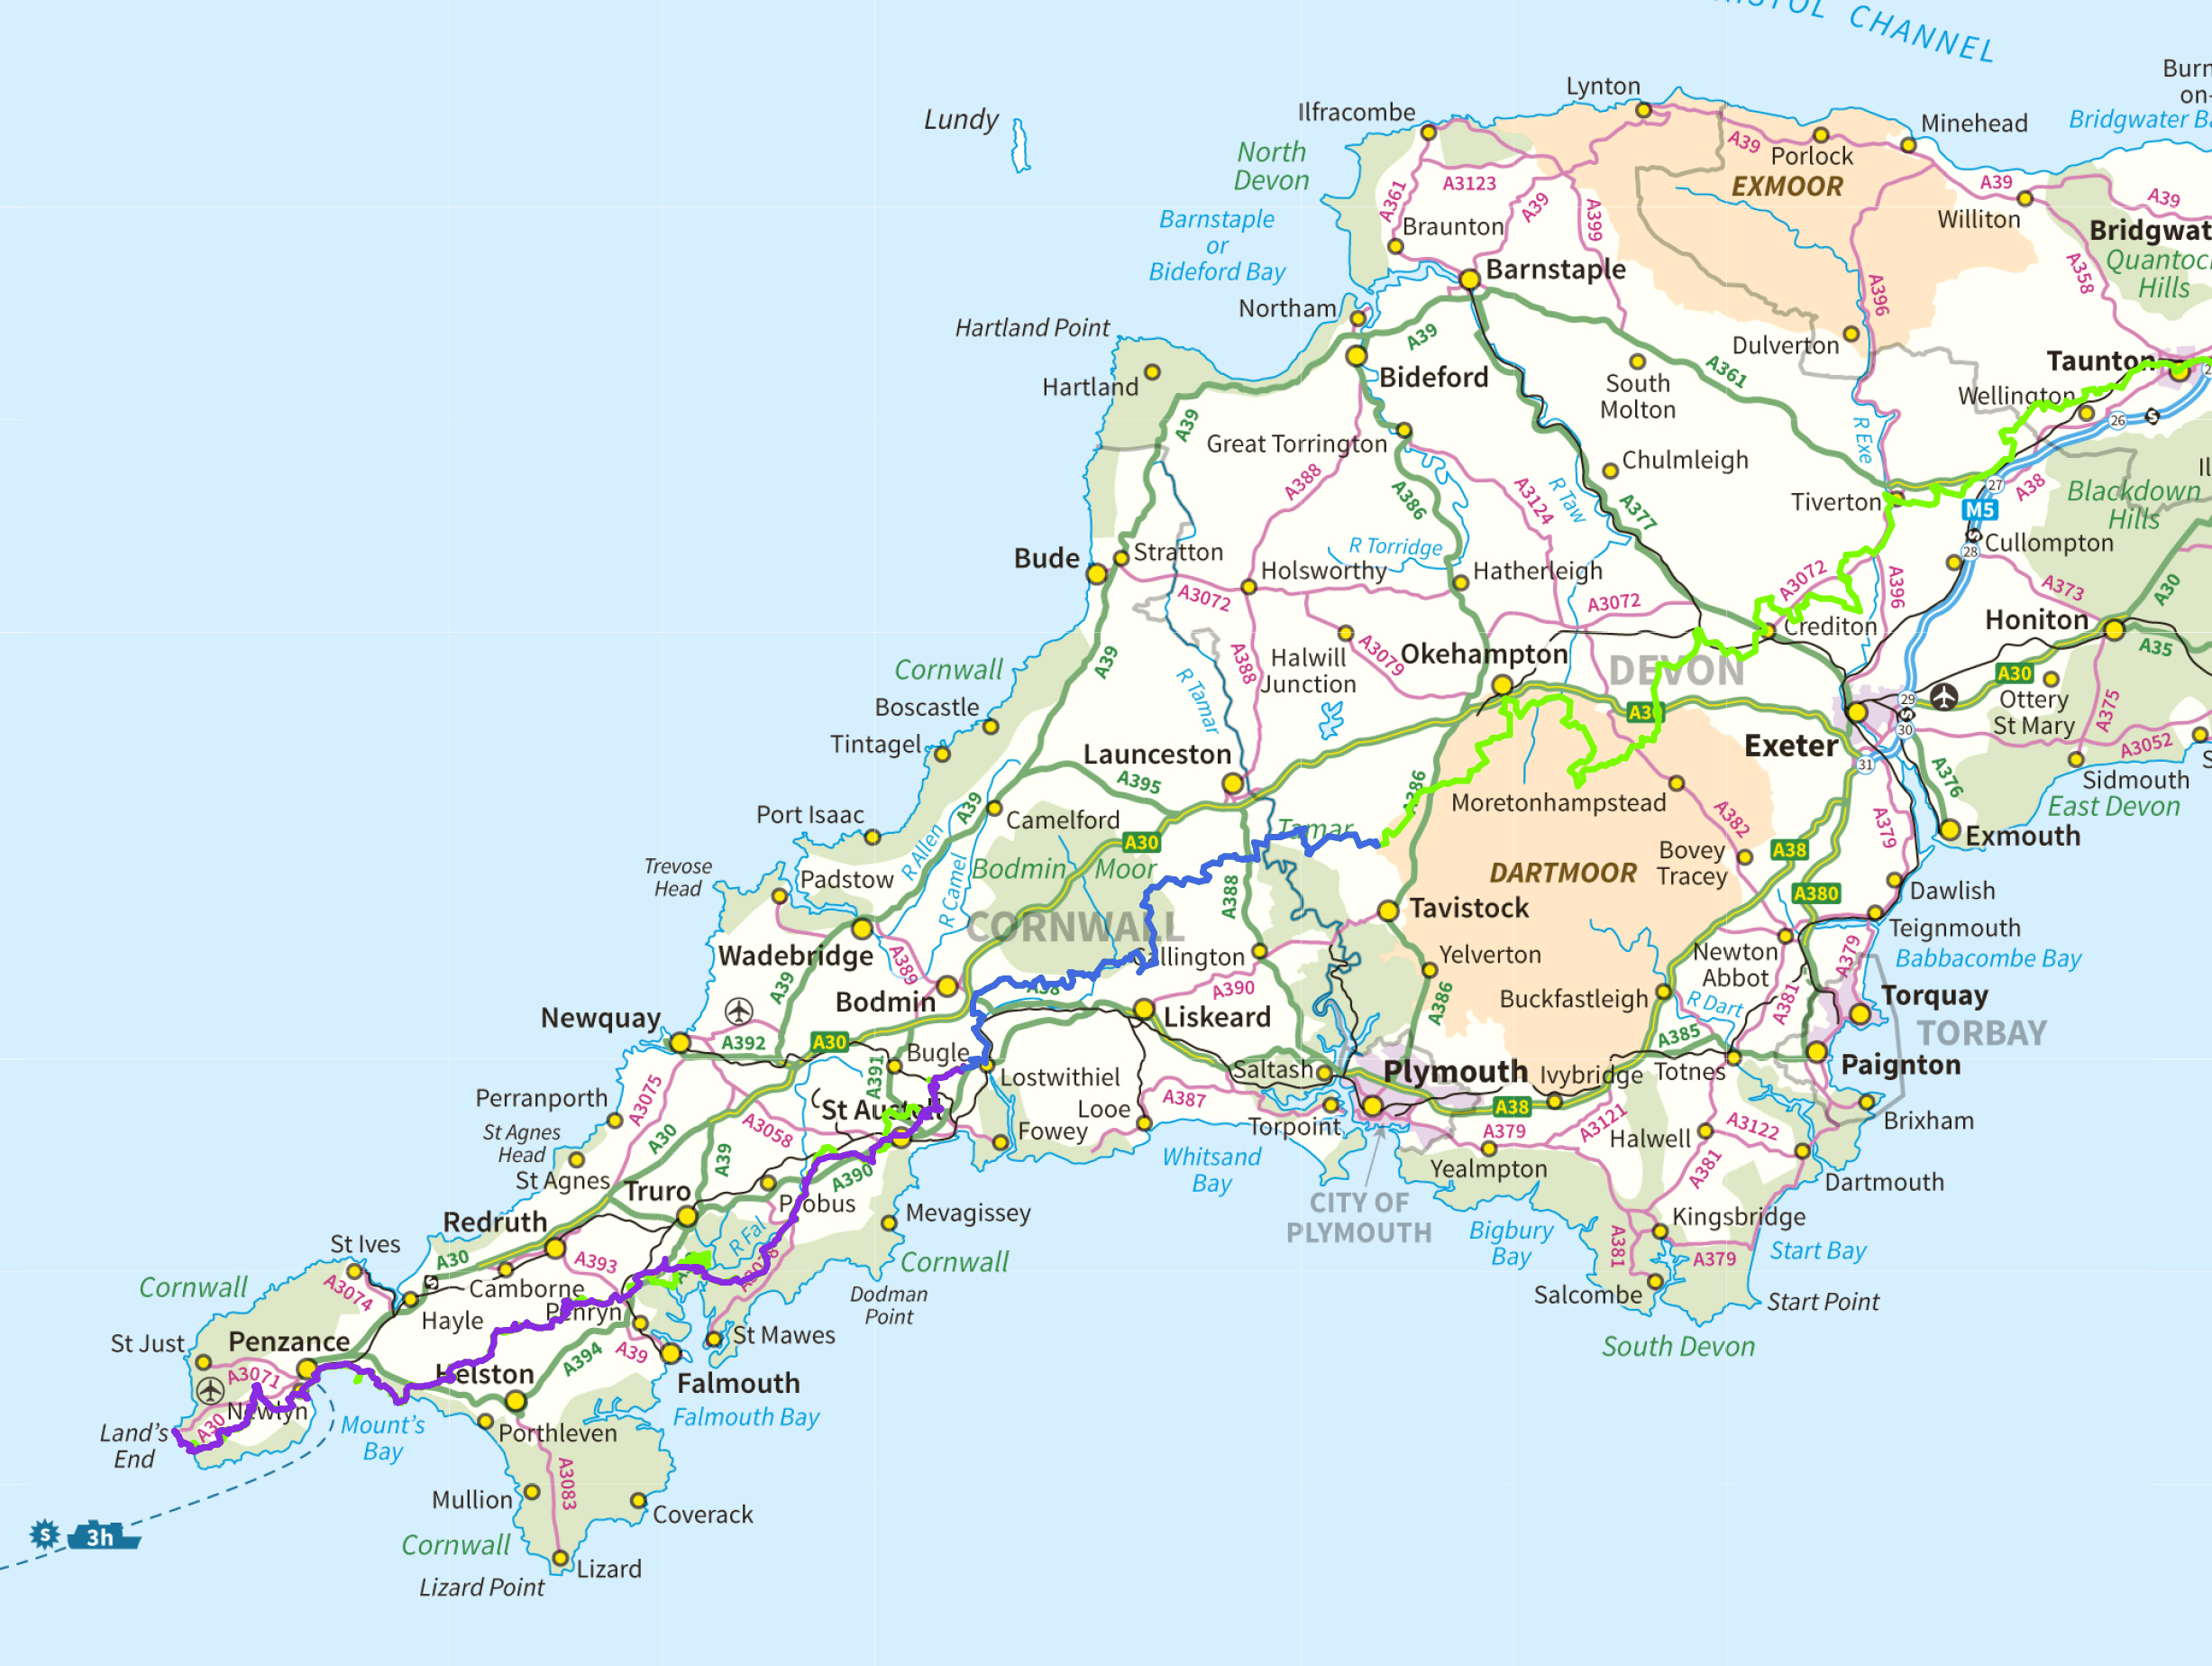 map of Cornwall with route marked in blue and purple